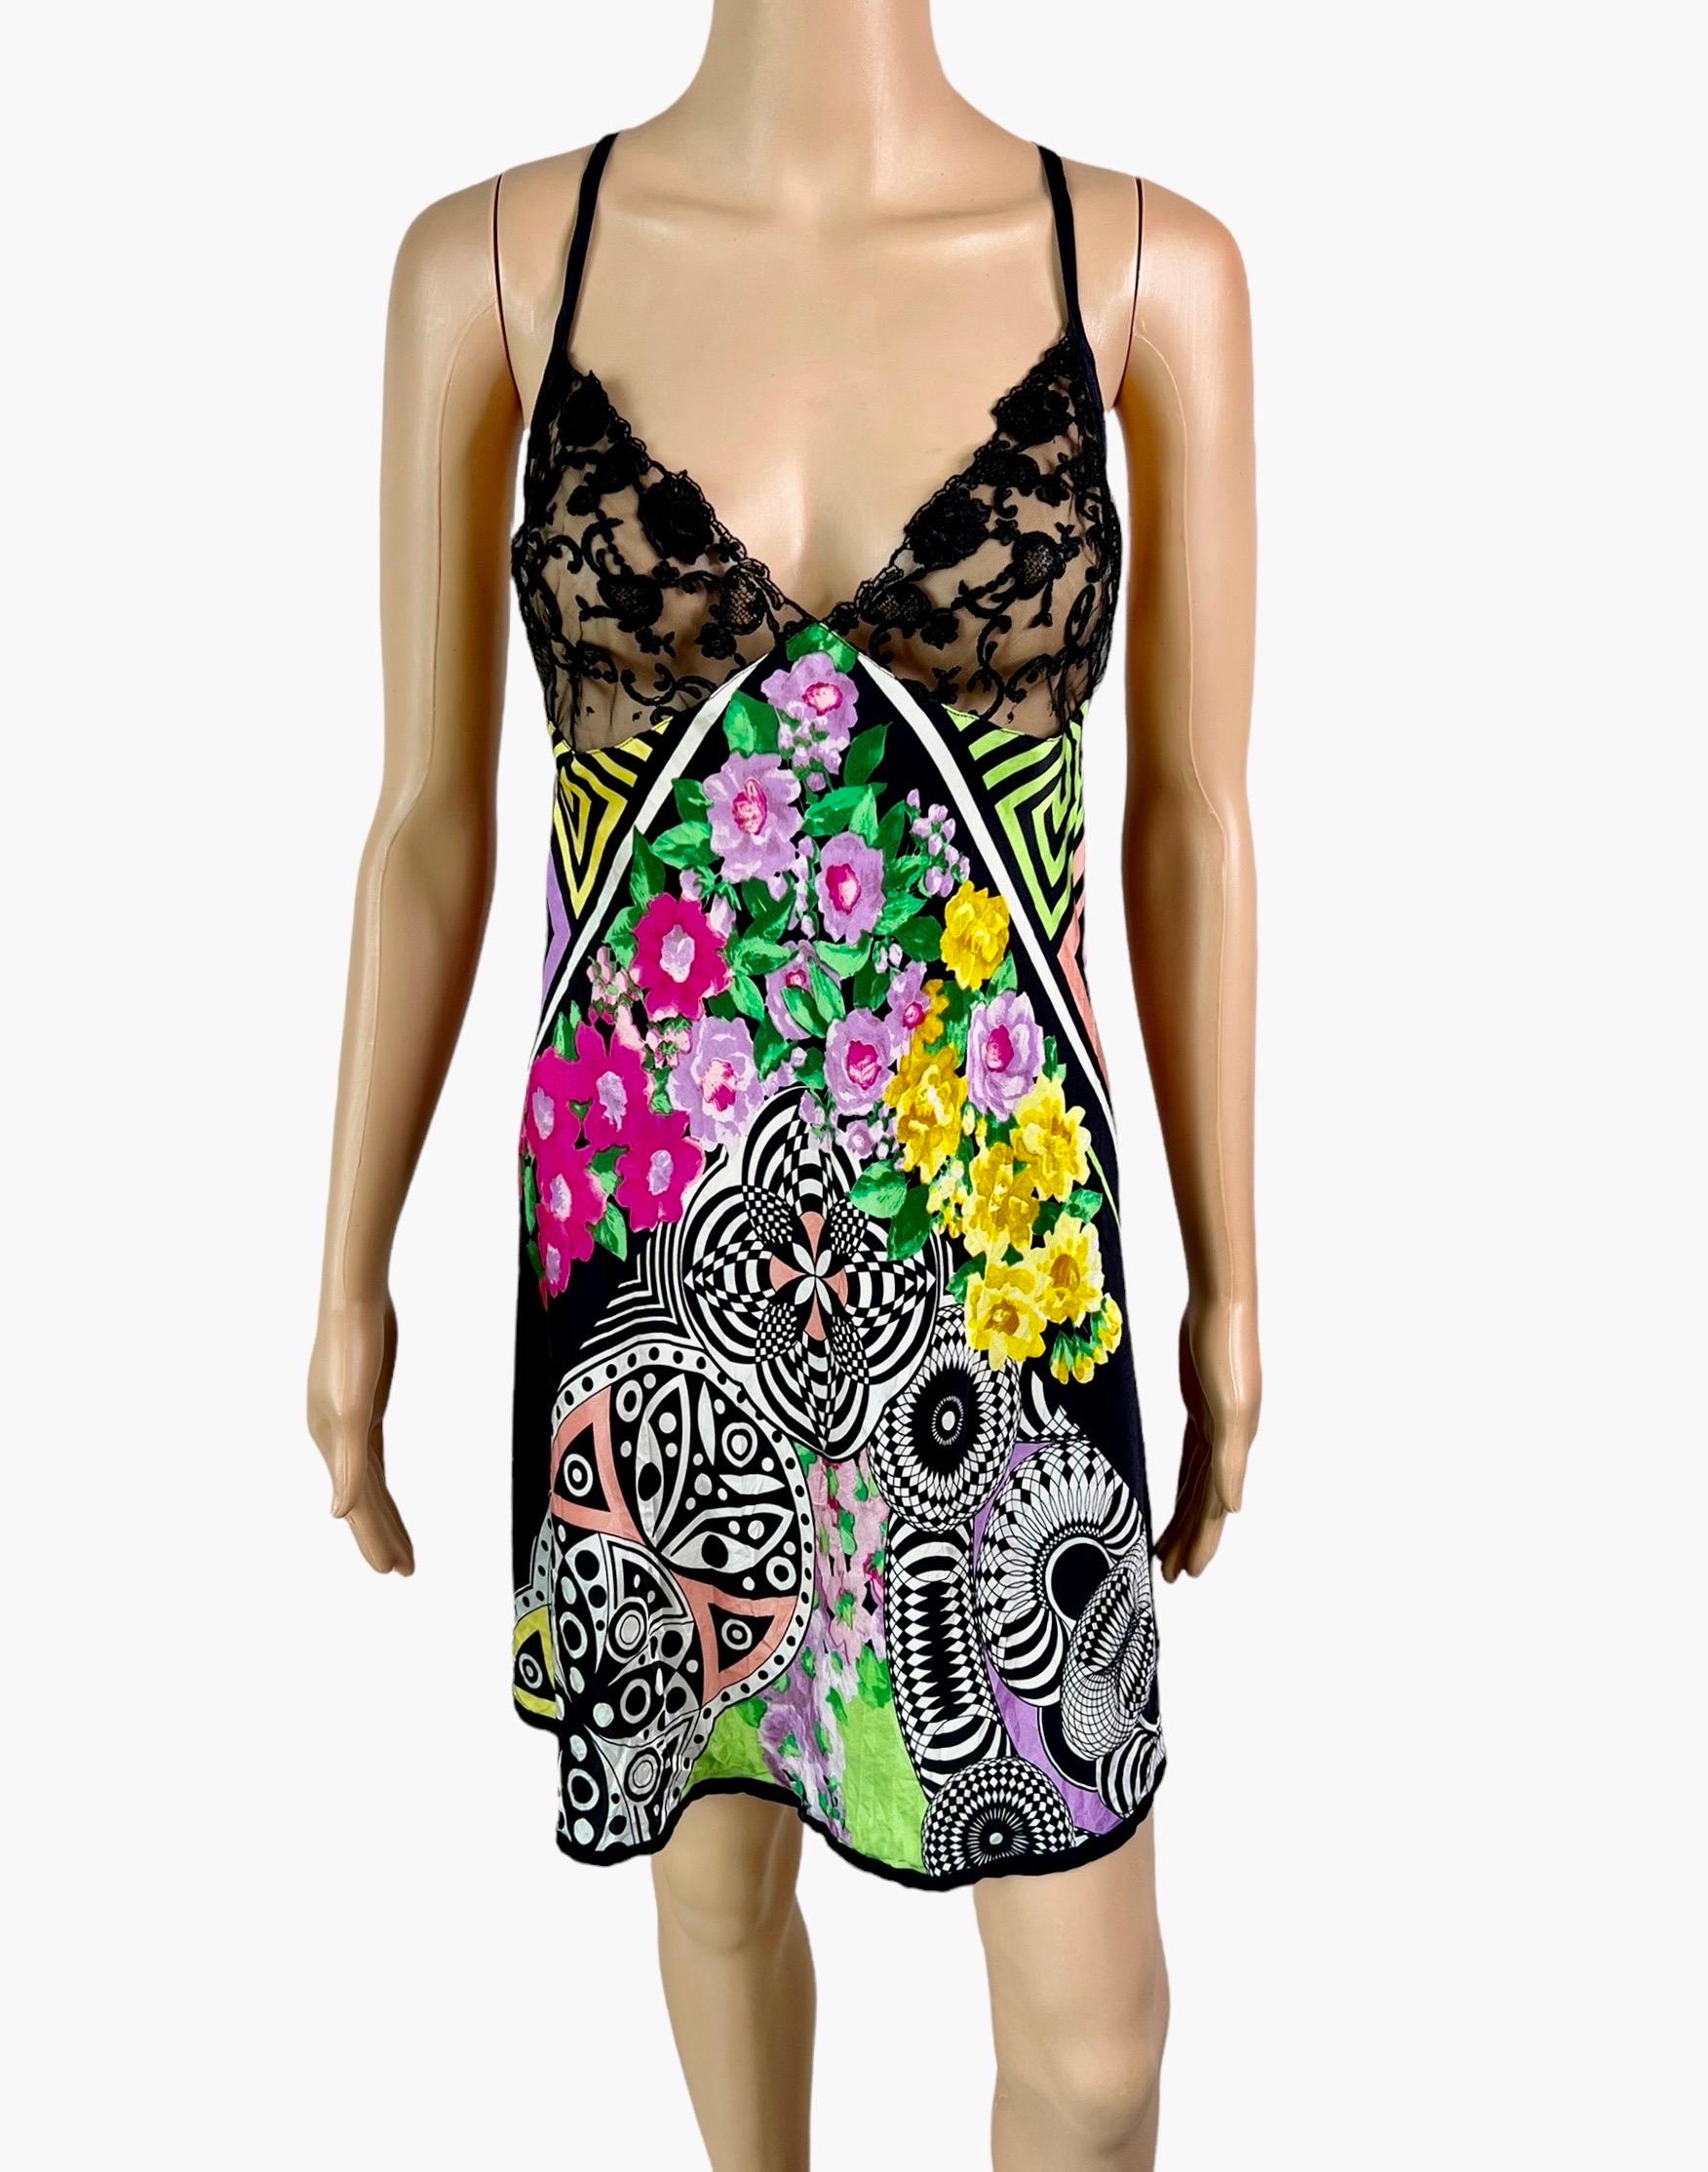 Gianni Versace S/S 1993 Sheer Lace Bra Floral Print Slip Silk Mini Dress In Good Condition For Sale In Naples, FL